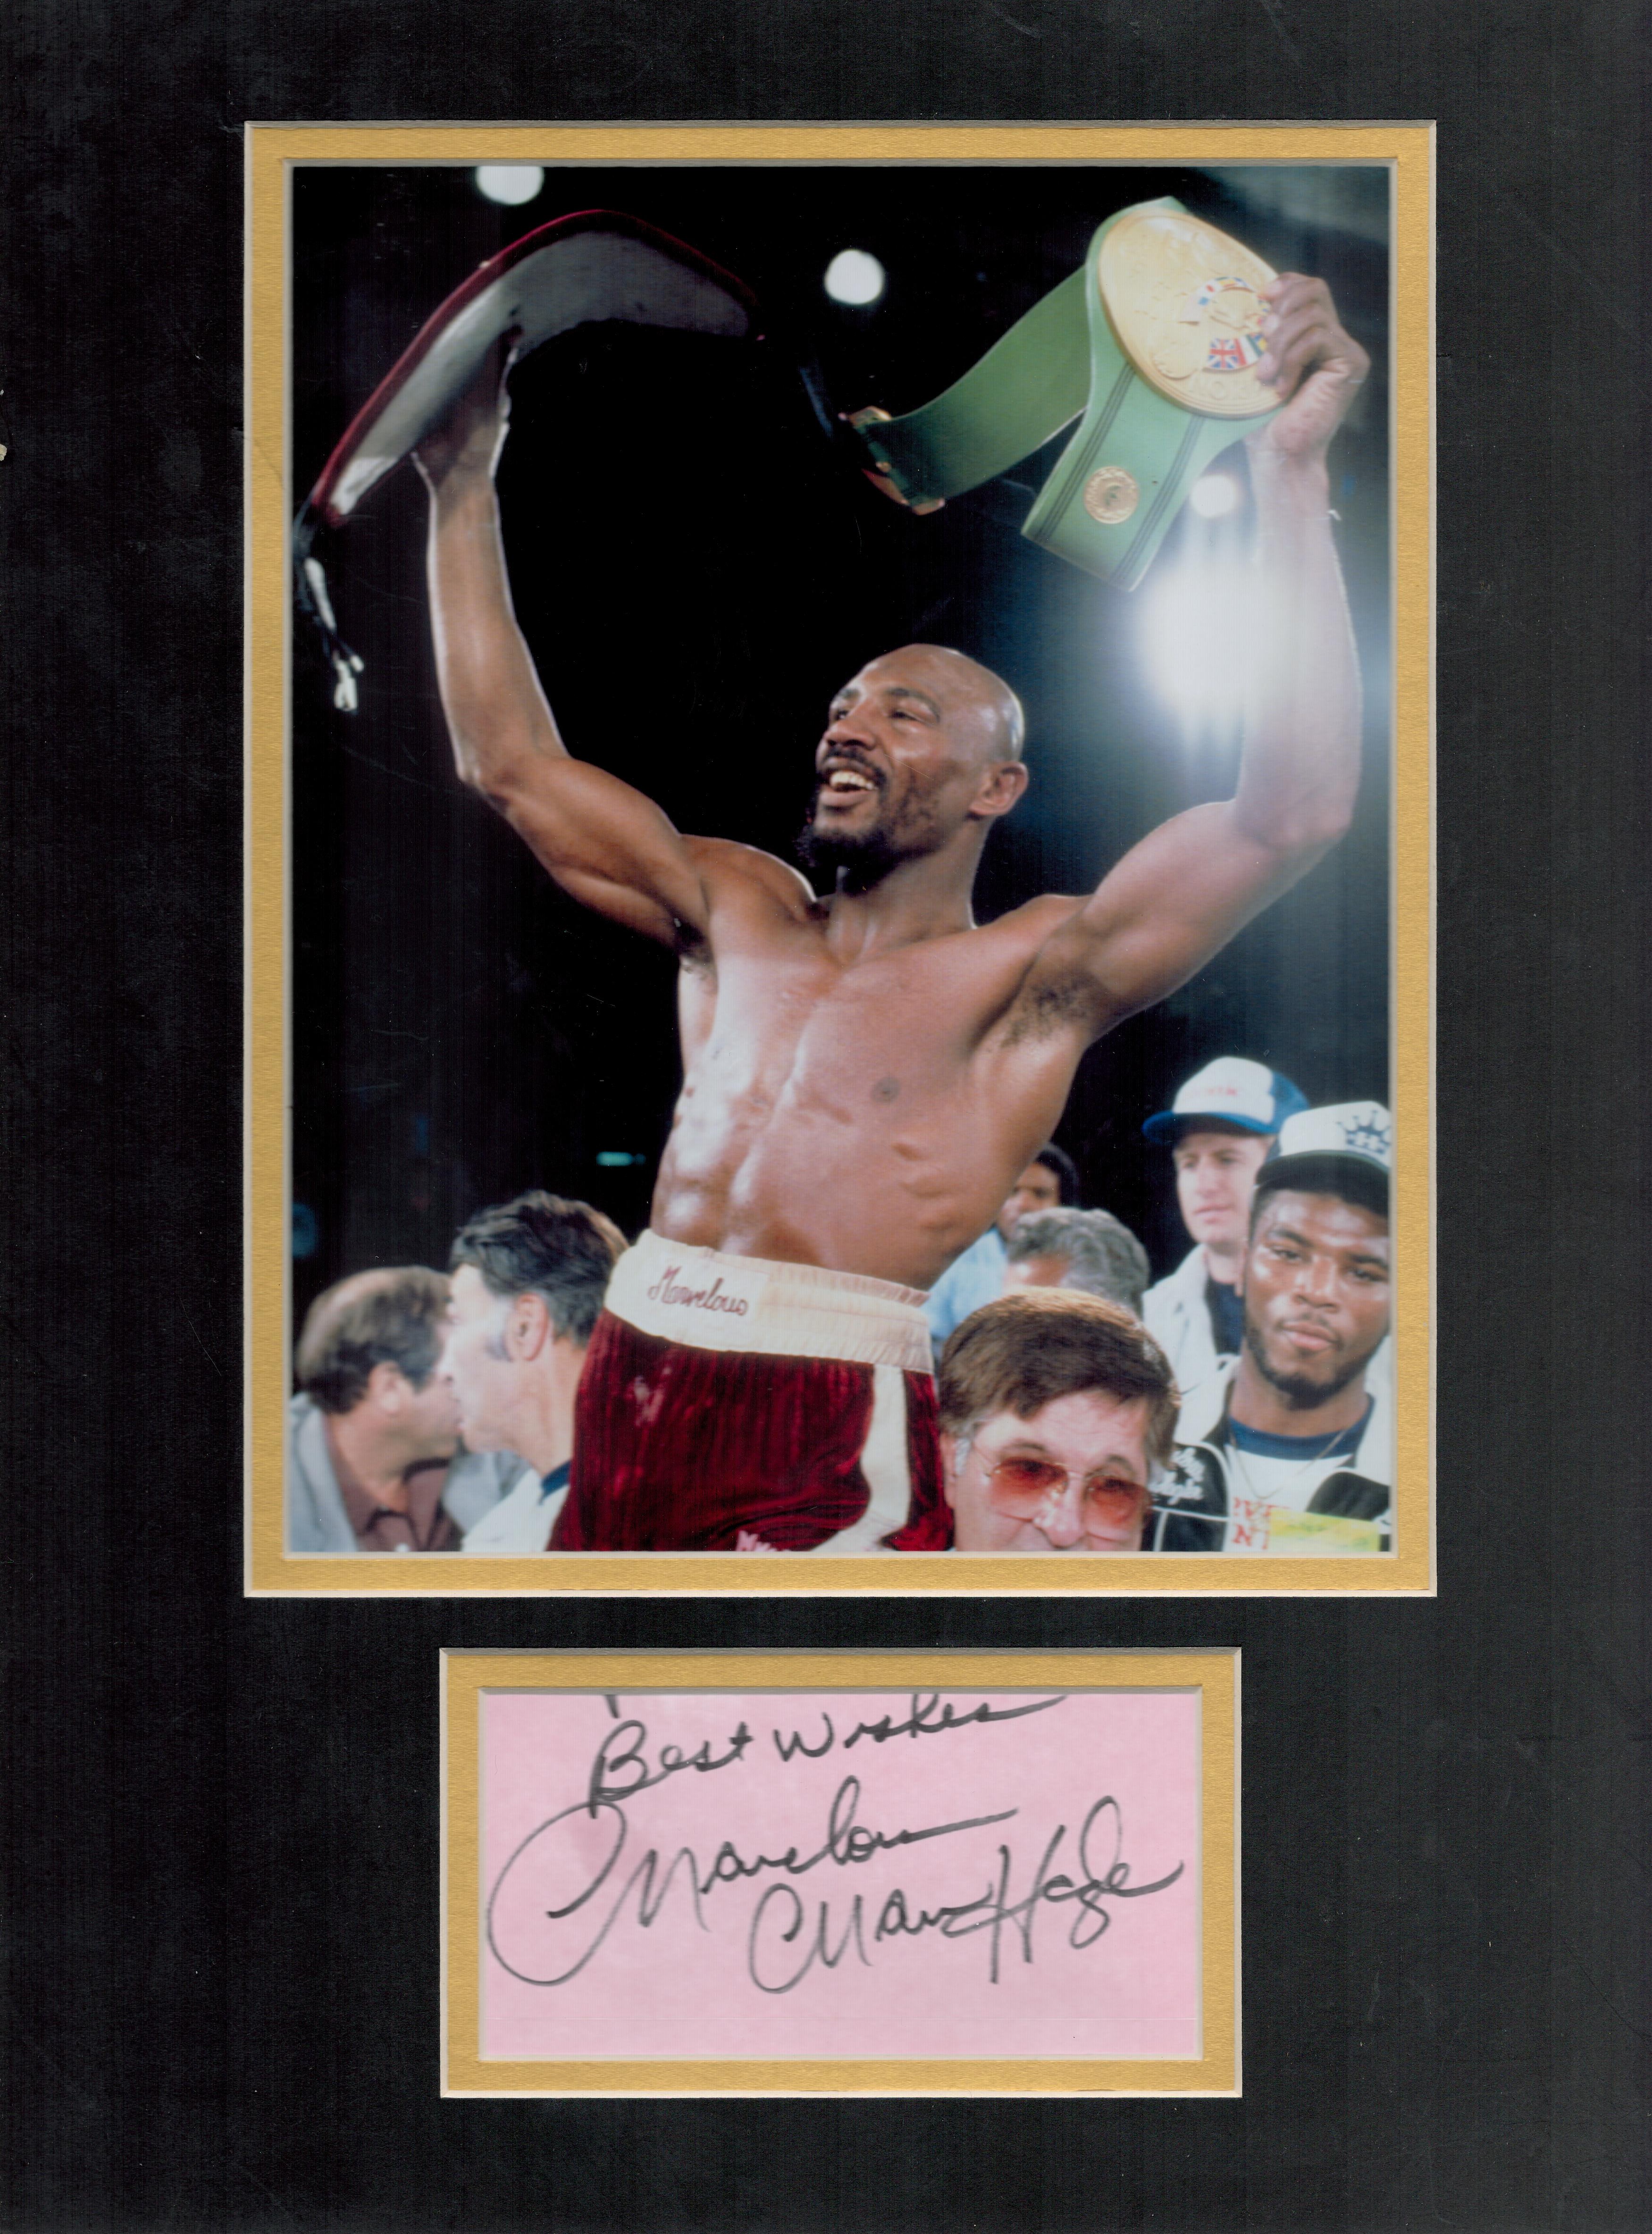 Marvelous Marvin Hagler 16x12 inch overall mounted signature piece includes signed album page and